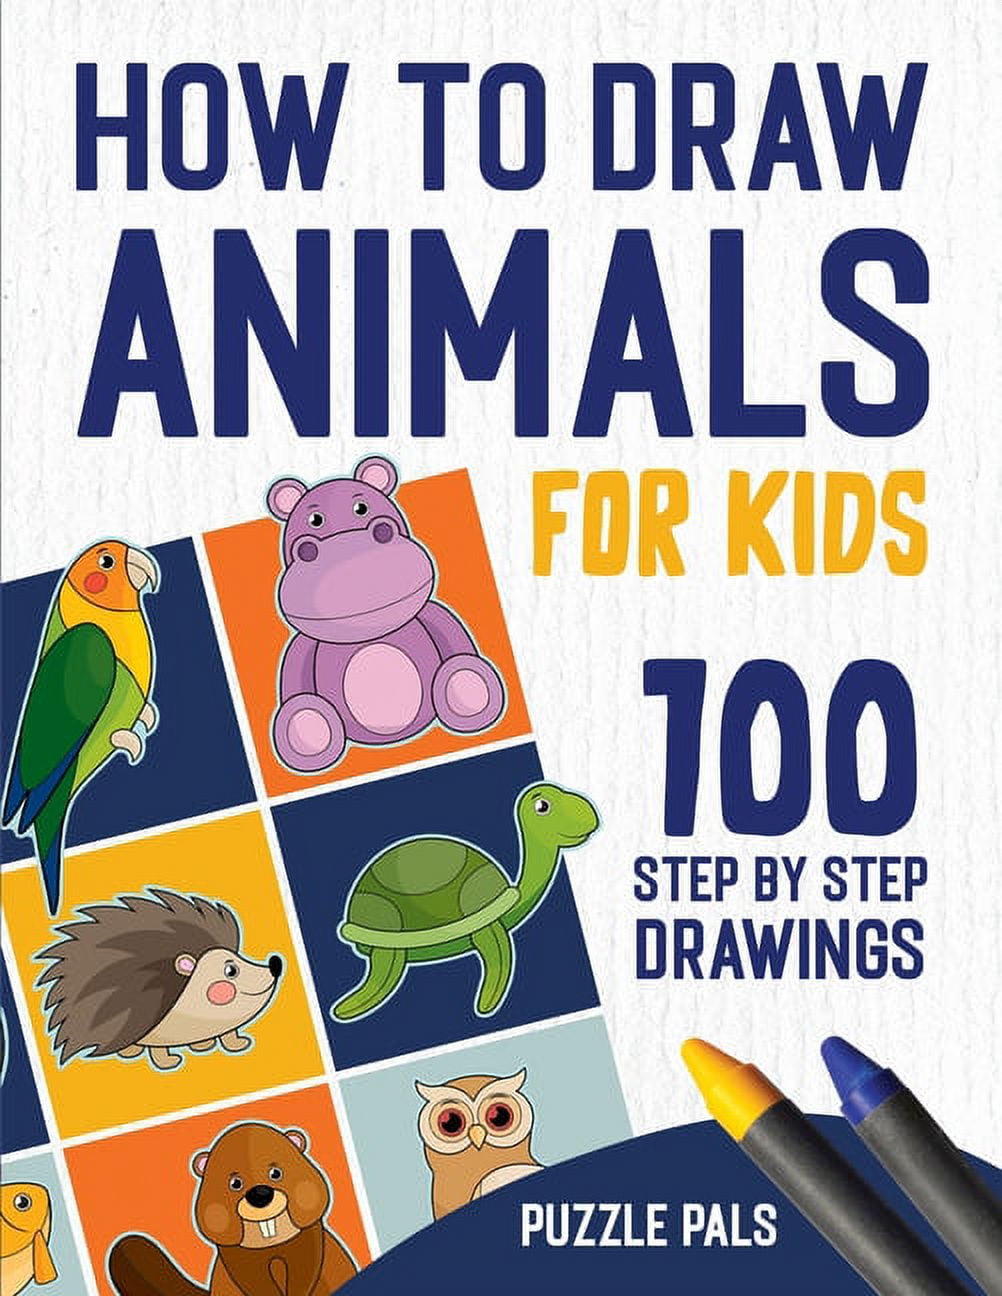 How to Draw Books. 101 Ways to Draw Animals. Simple Step-by-Step